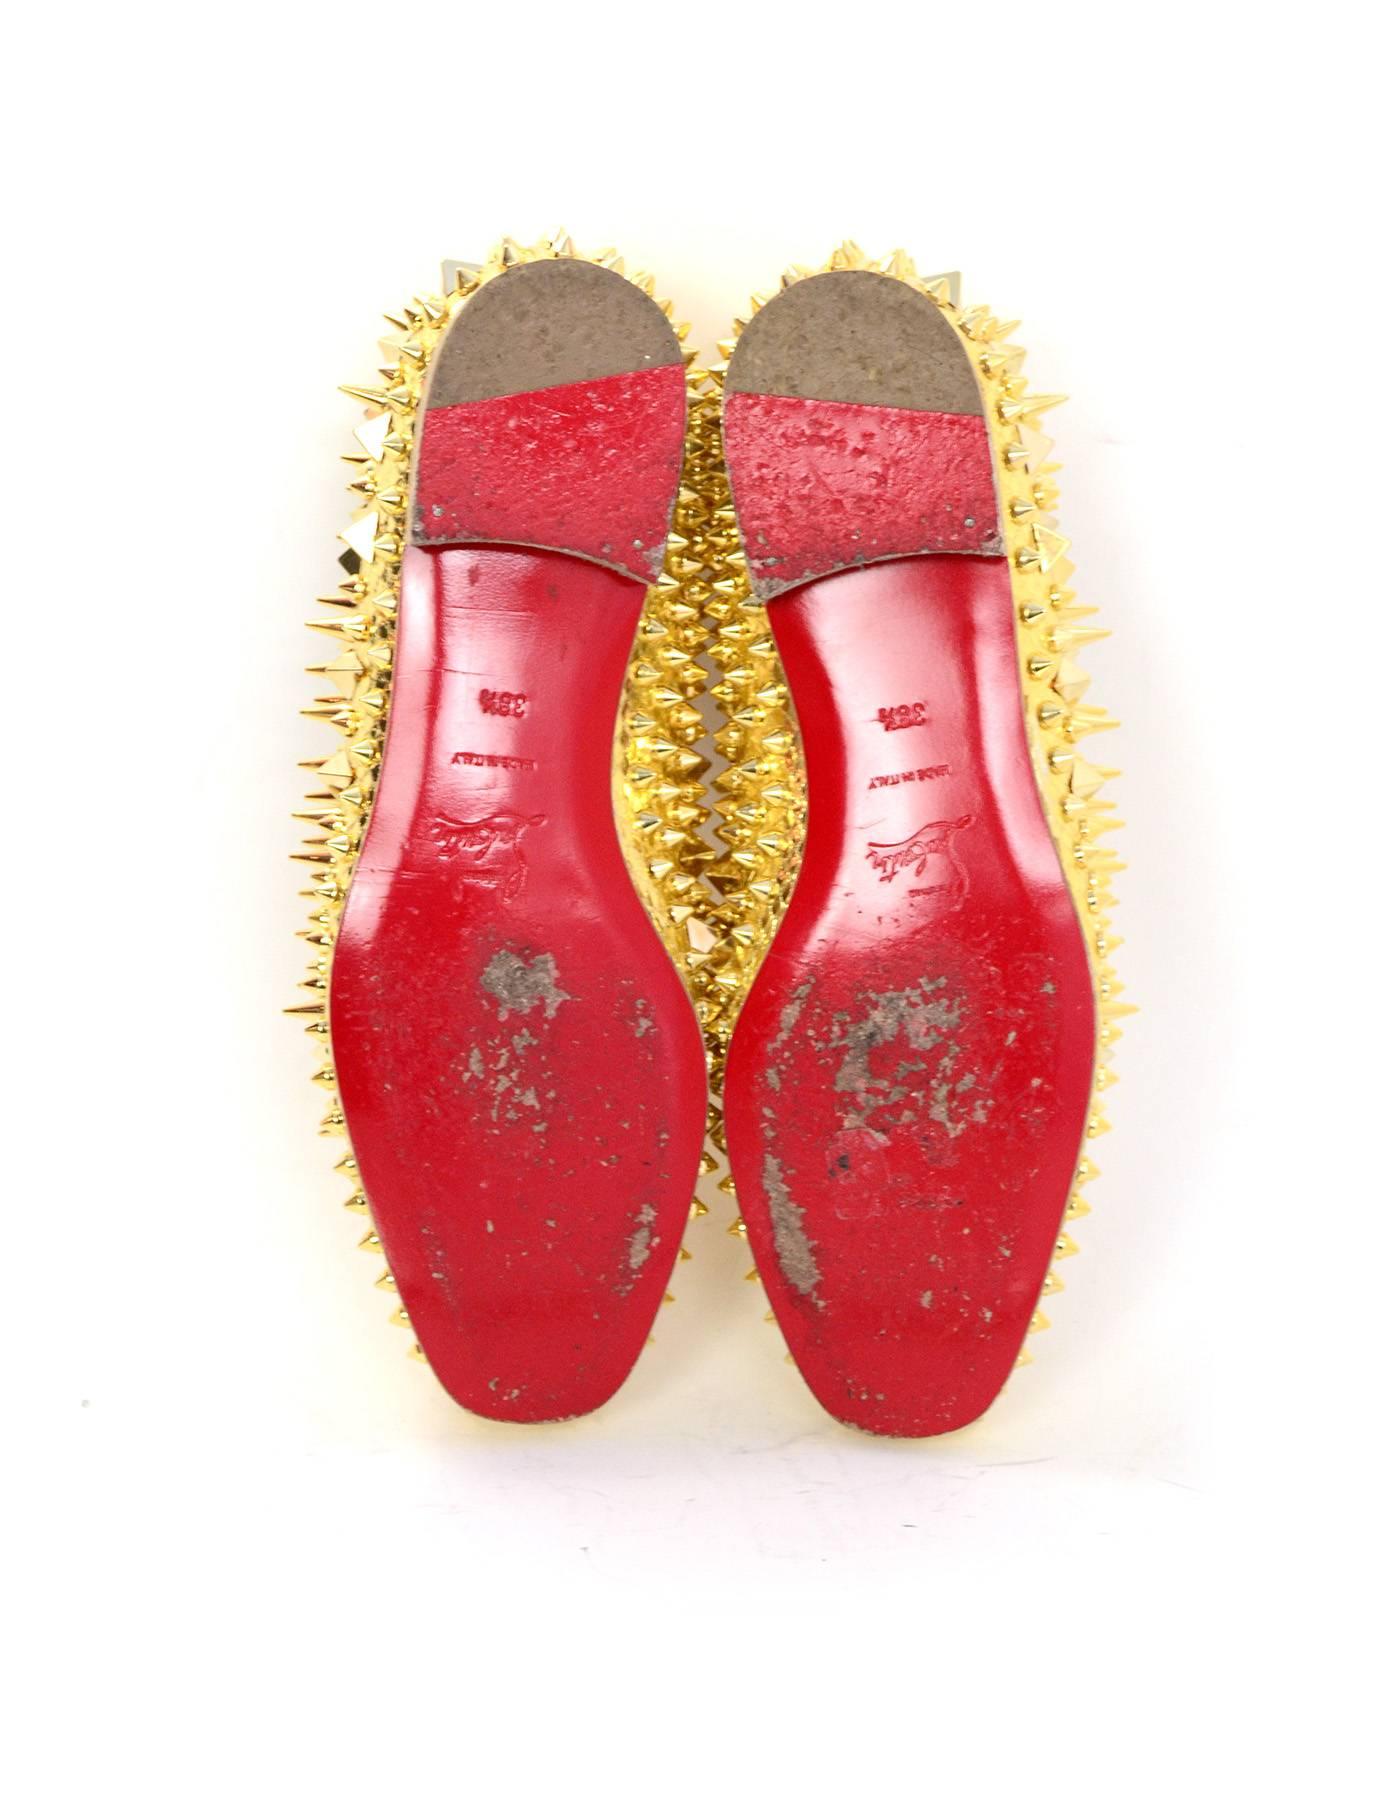 Women's Christian Louboutin Gold Spiked Loafers Sz 38.5